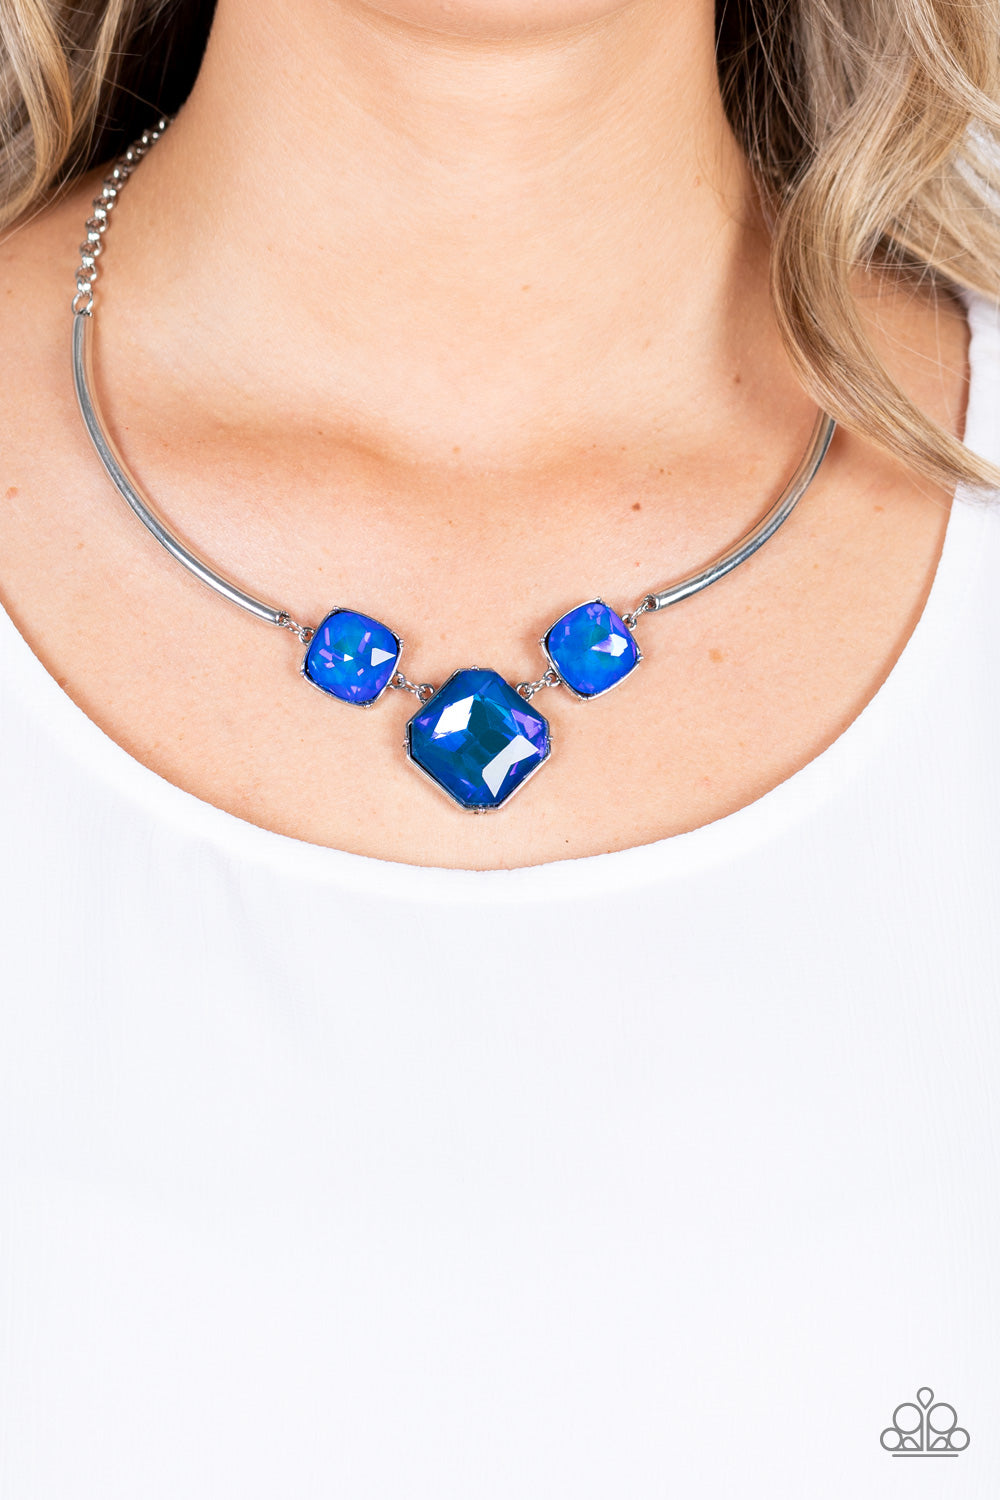 PRE-ORDER - Divine IRIDESCENCE - Blue UV Shimmer - 2021 October Paparazzi Life of the Party Necklace